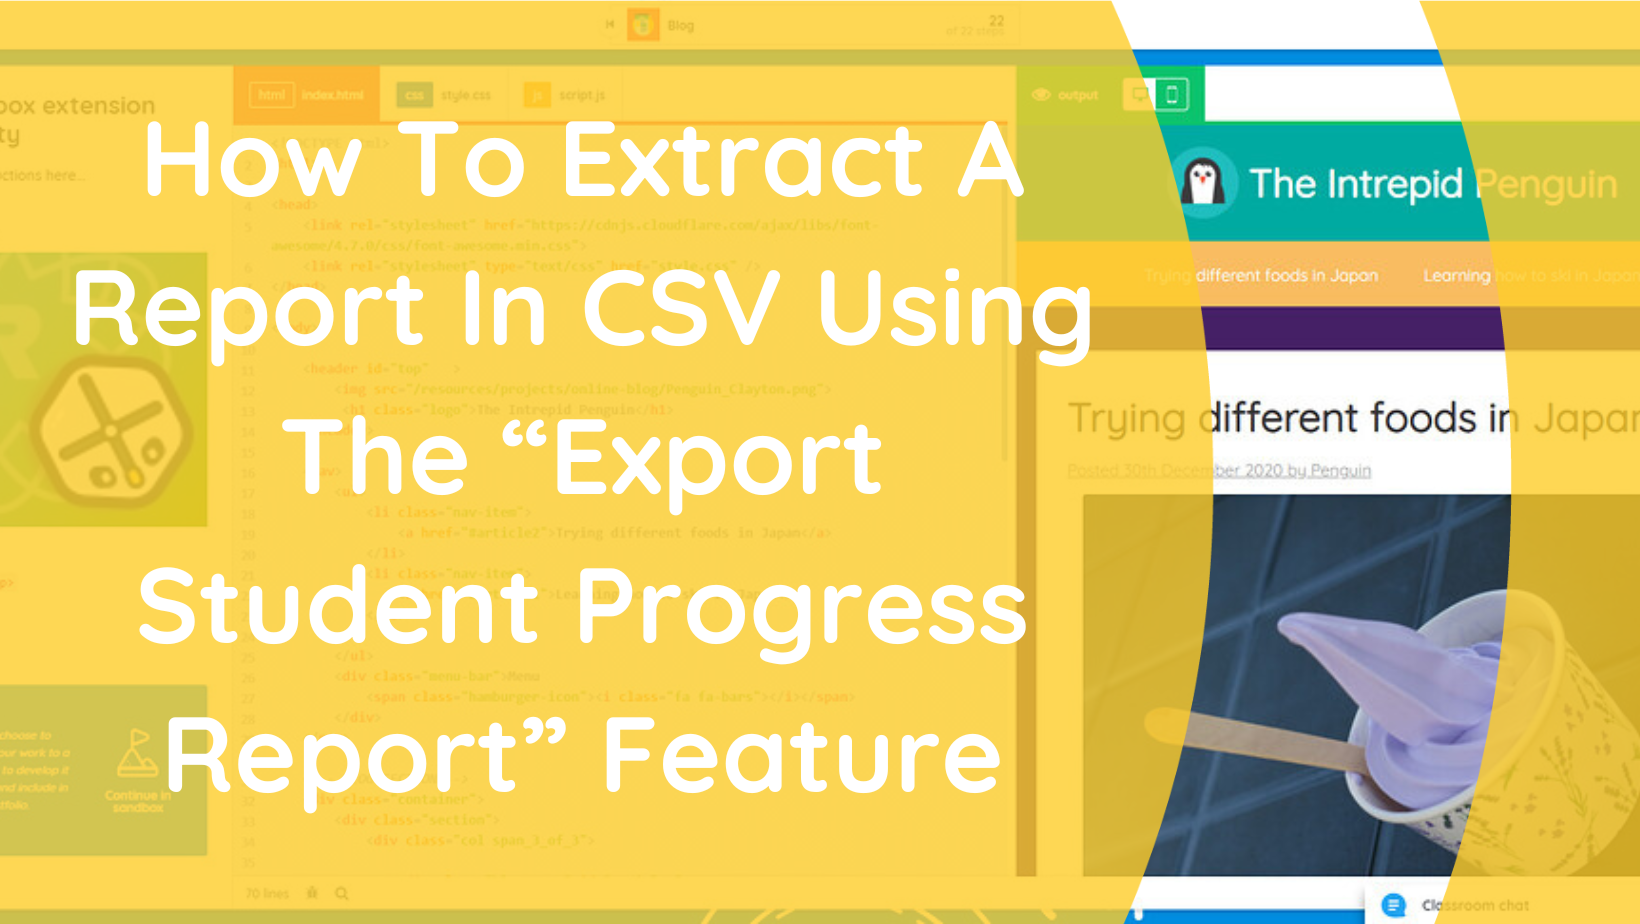 How to extract a report in CSV using the “Export student progress report” feature